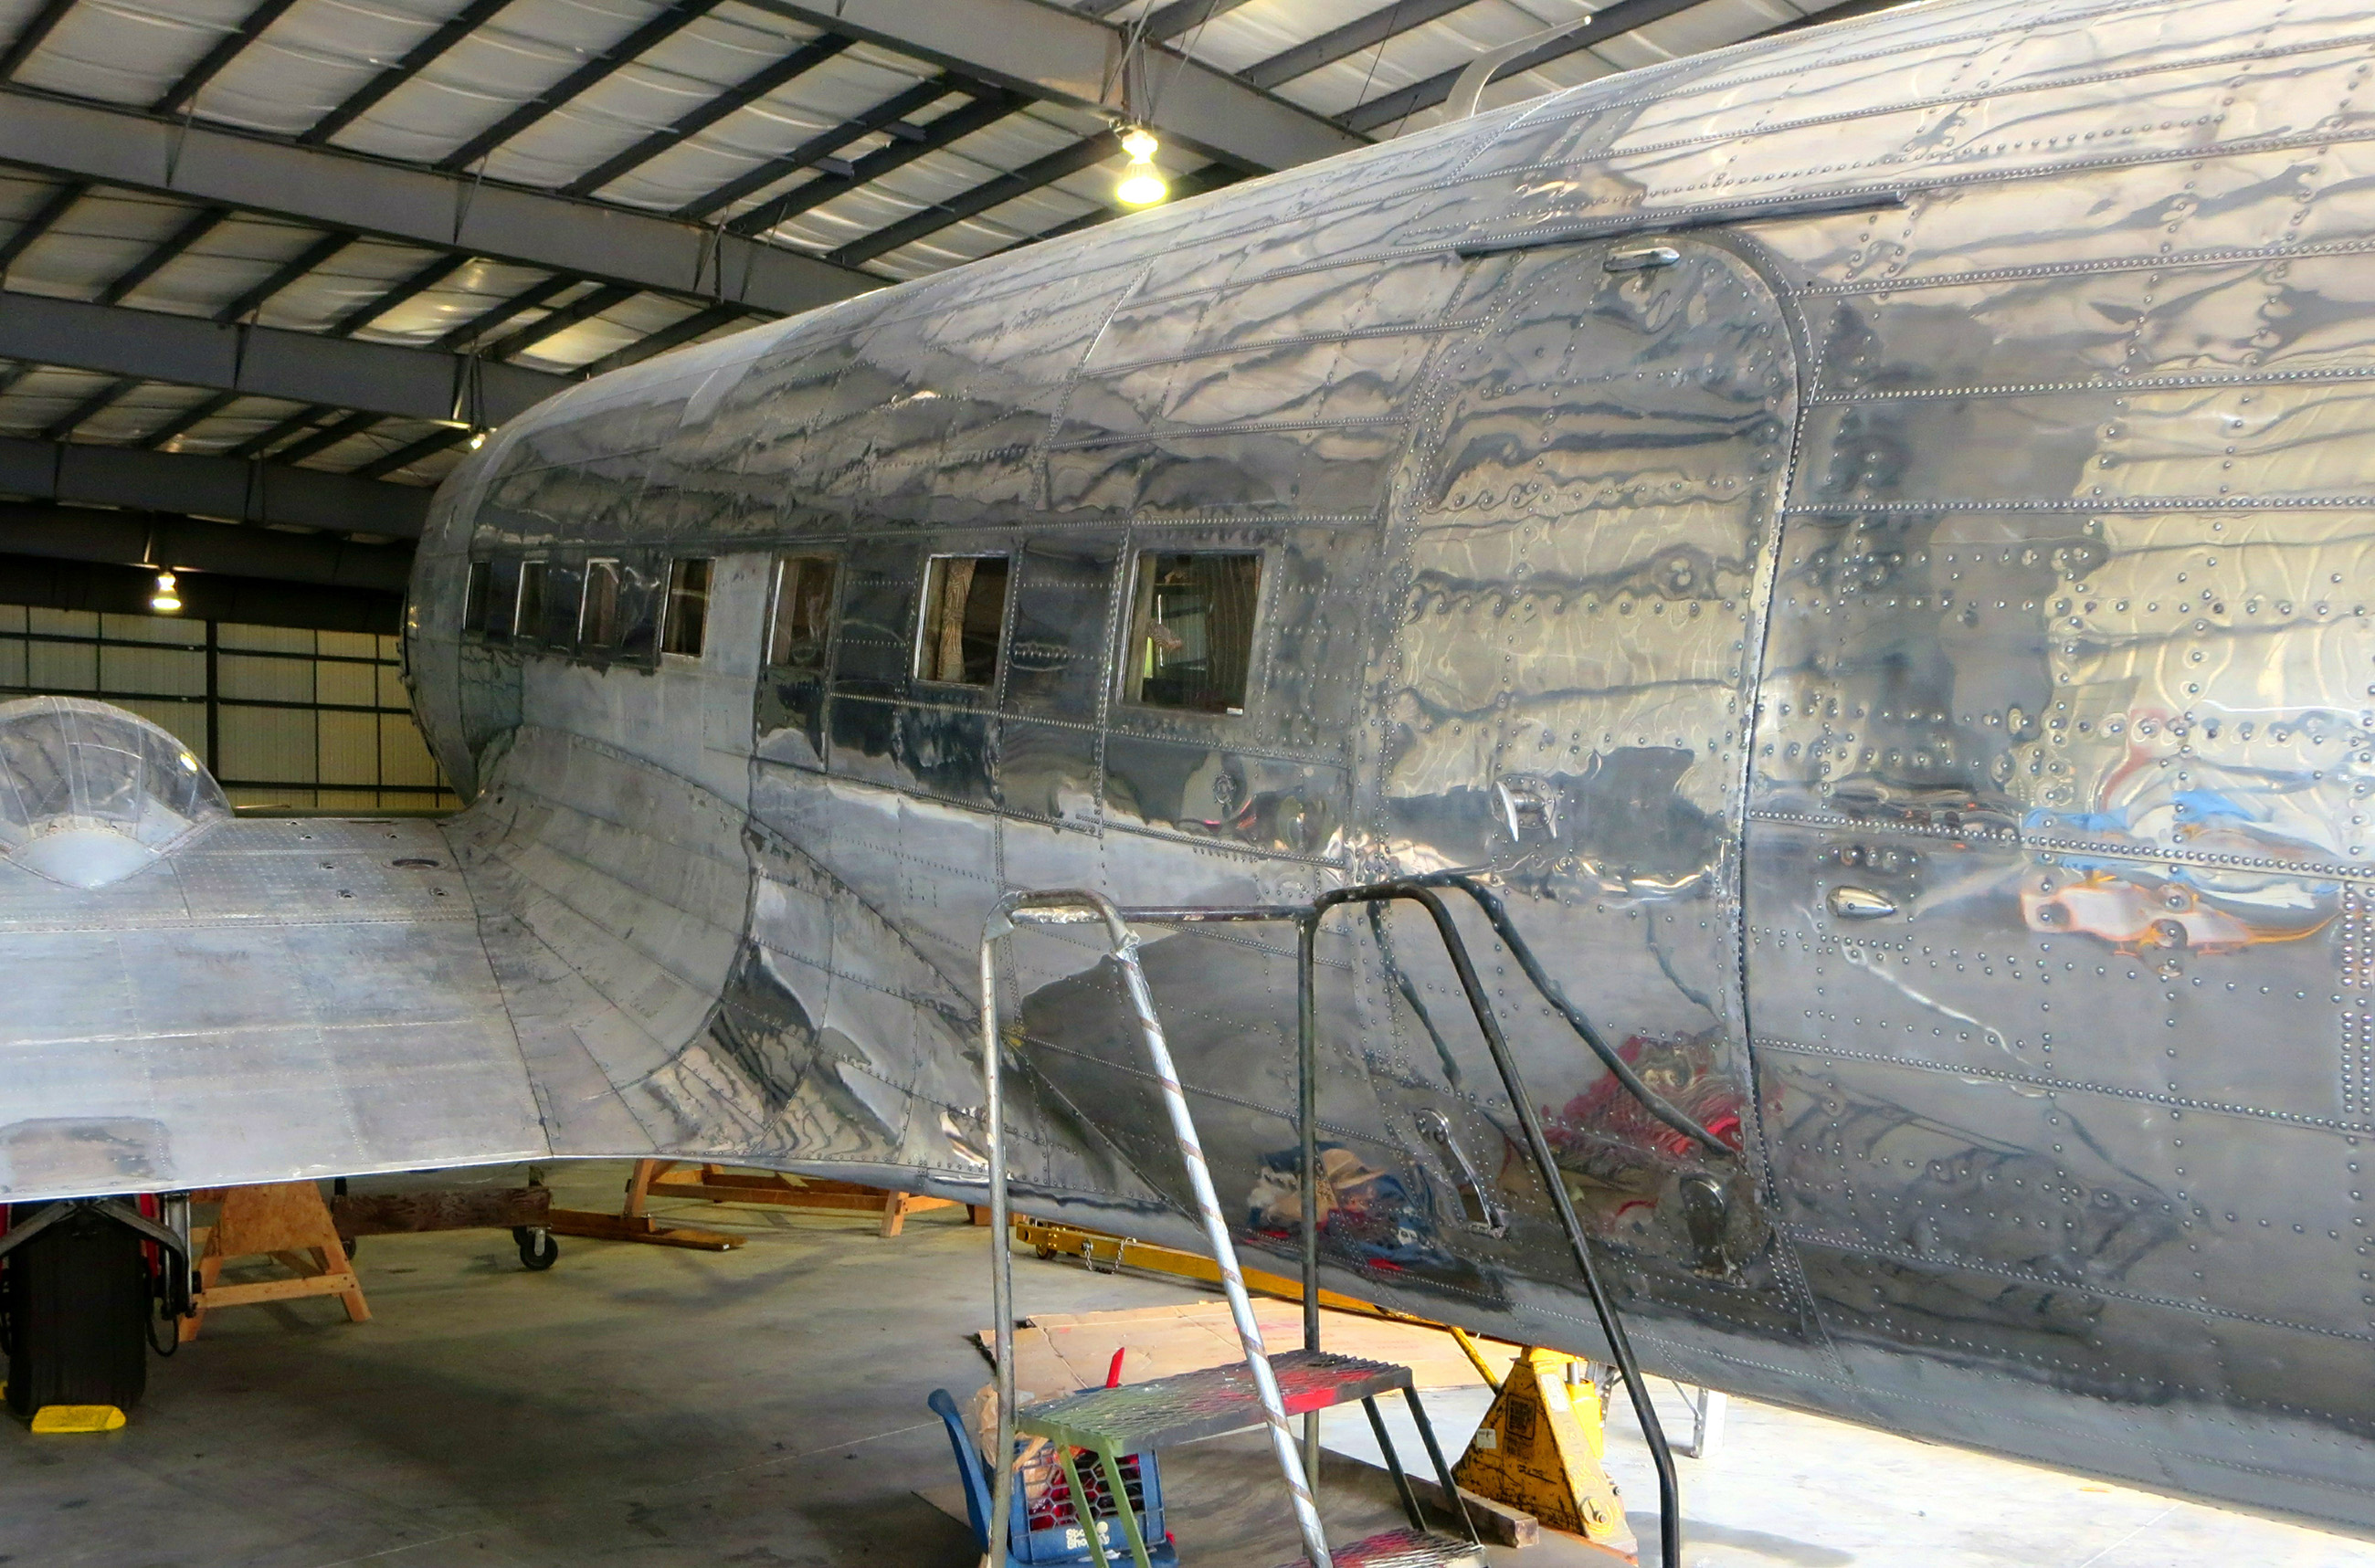 The fuselage is now well into the polishing process, and it's clear that the end results will be breathtakingly beautiful. (photo via NEAM)